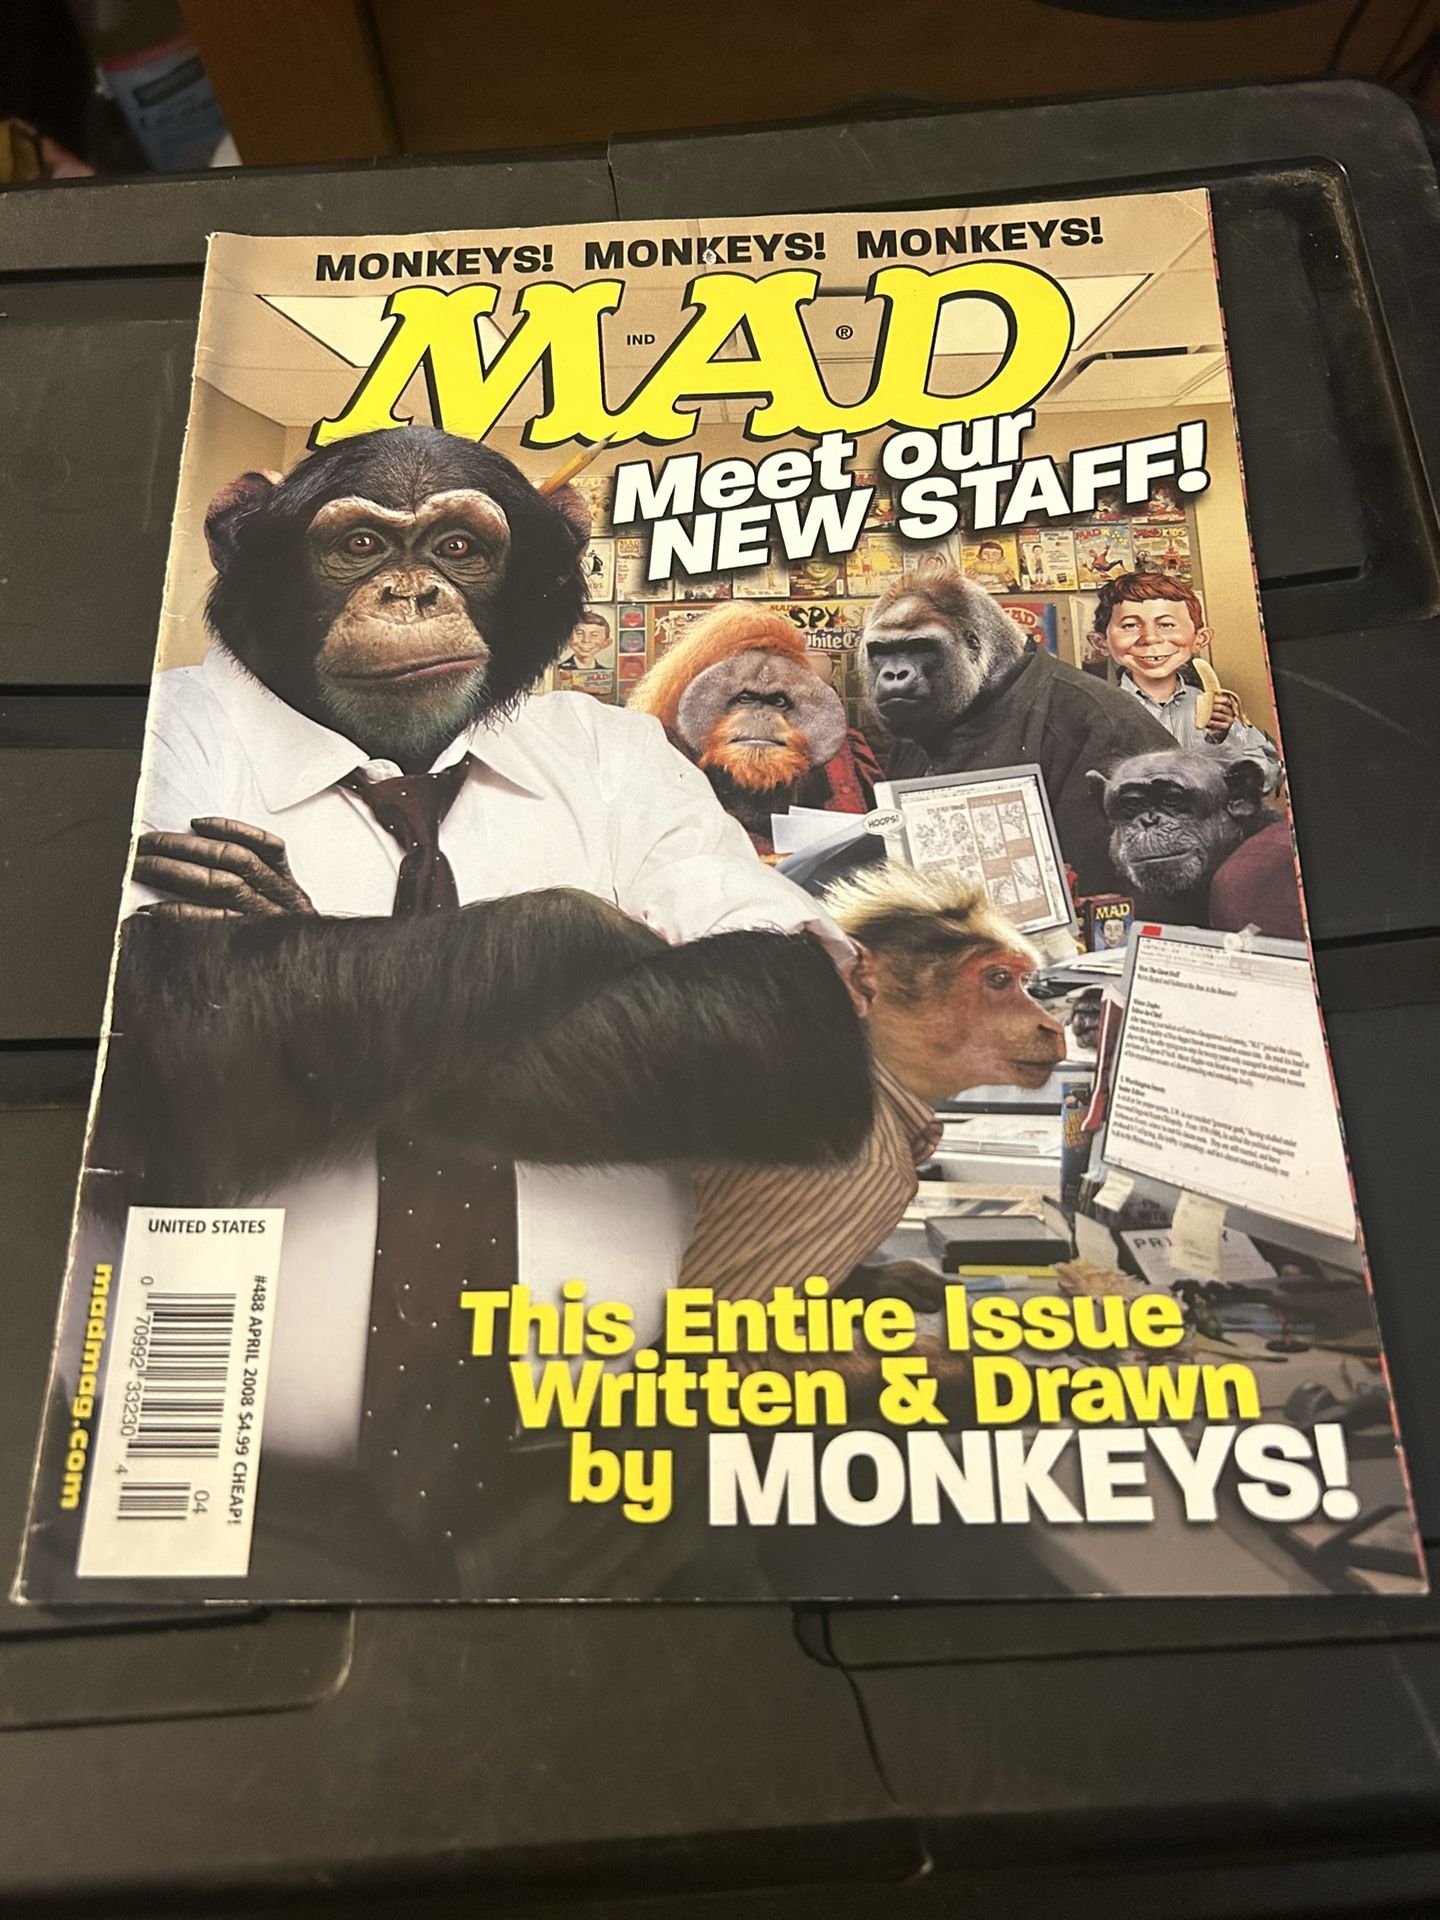 MAD #488 April 2008 Monkey Issue Meet our New Staff